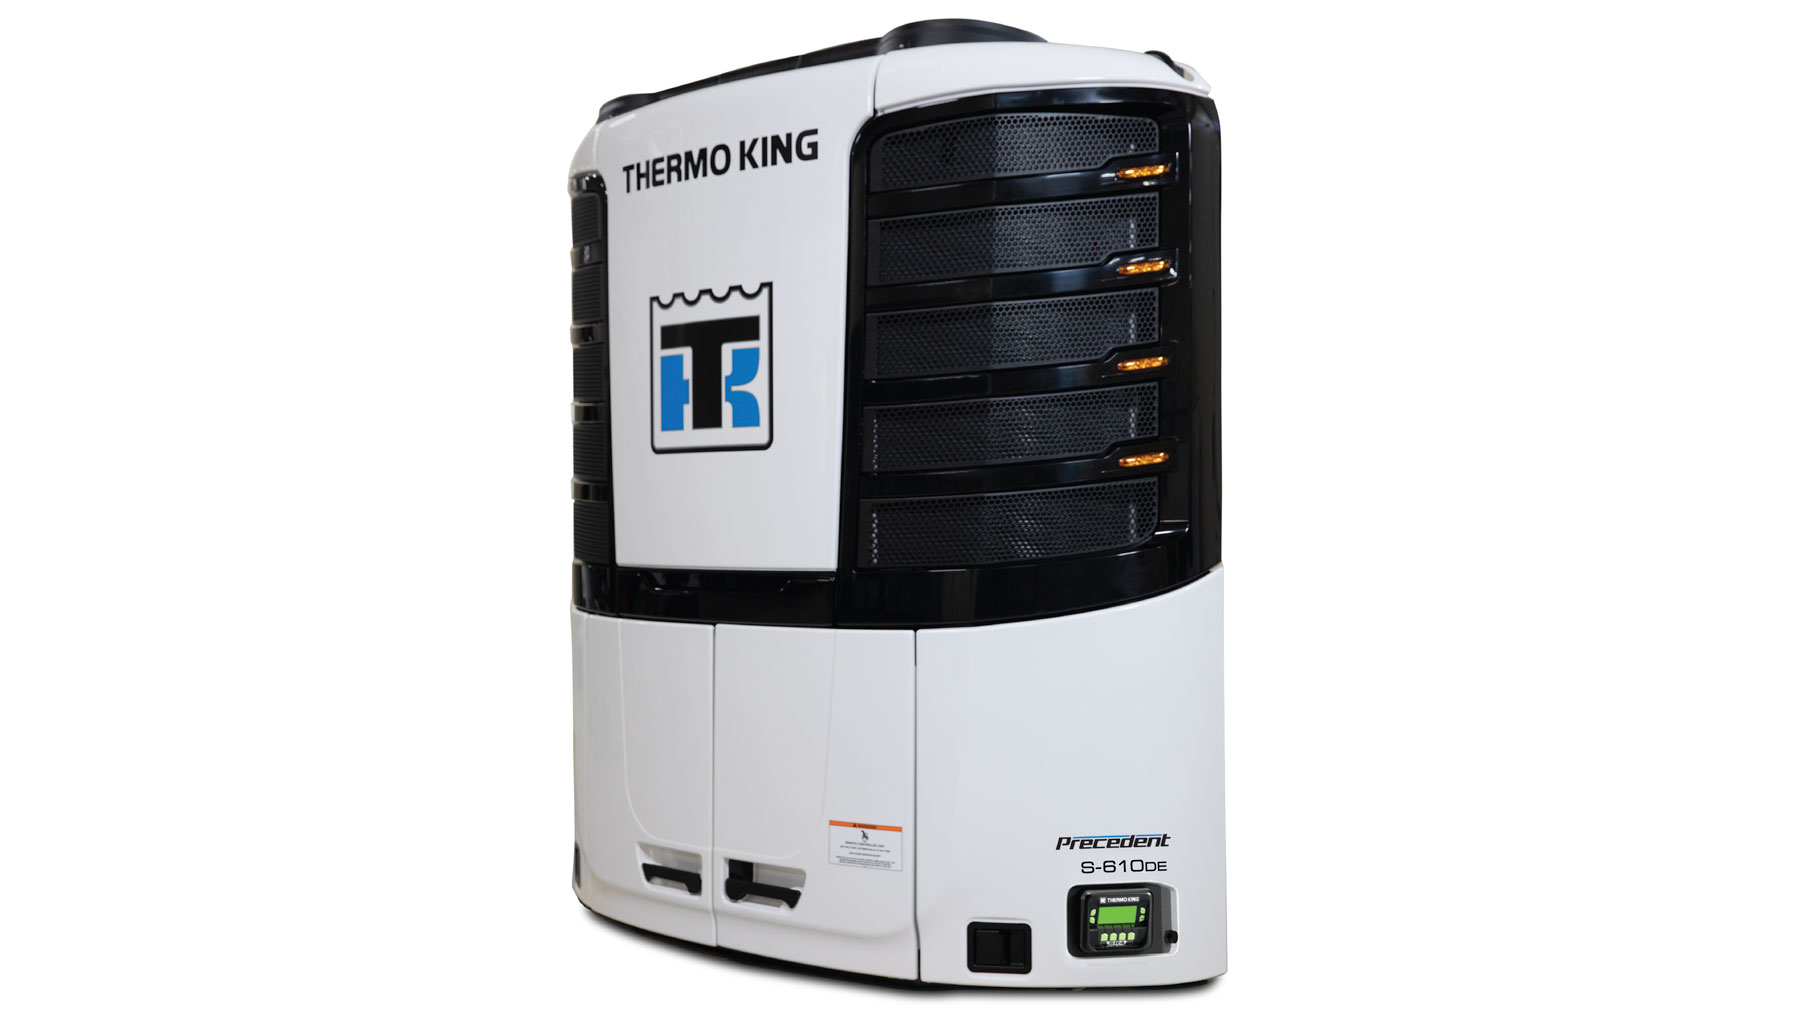 For more than 11 years, Thermo King Precedent®  has been the leading reefer unit in North America.